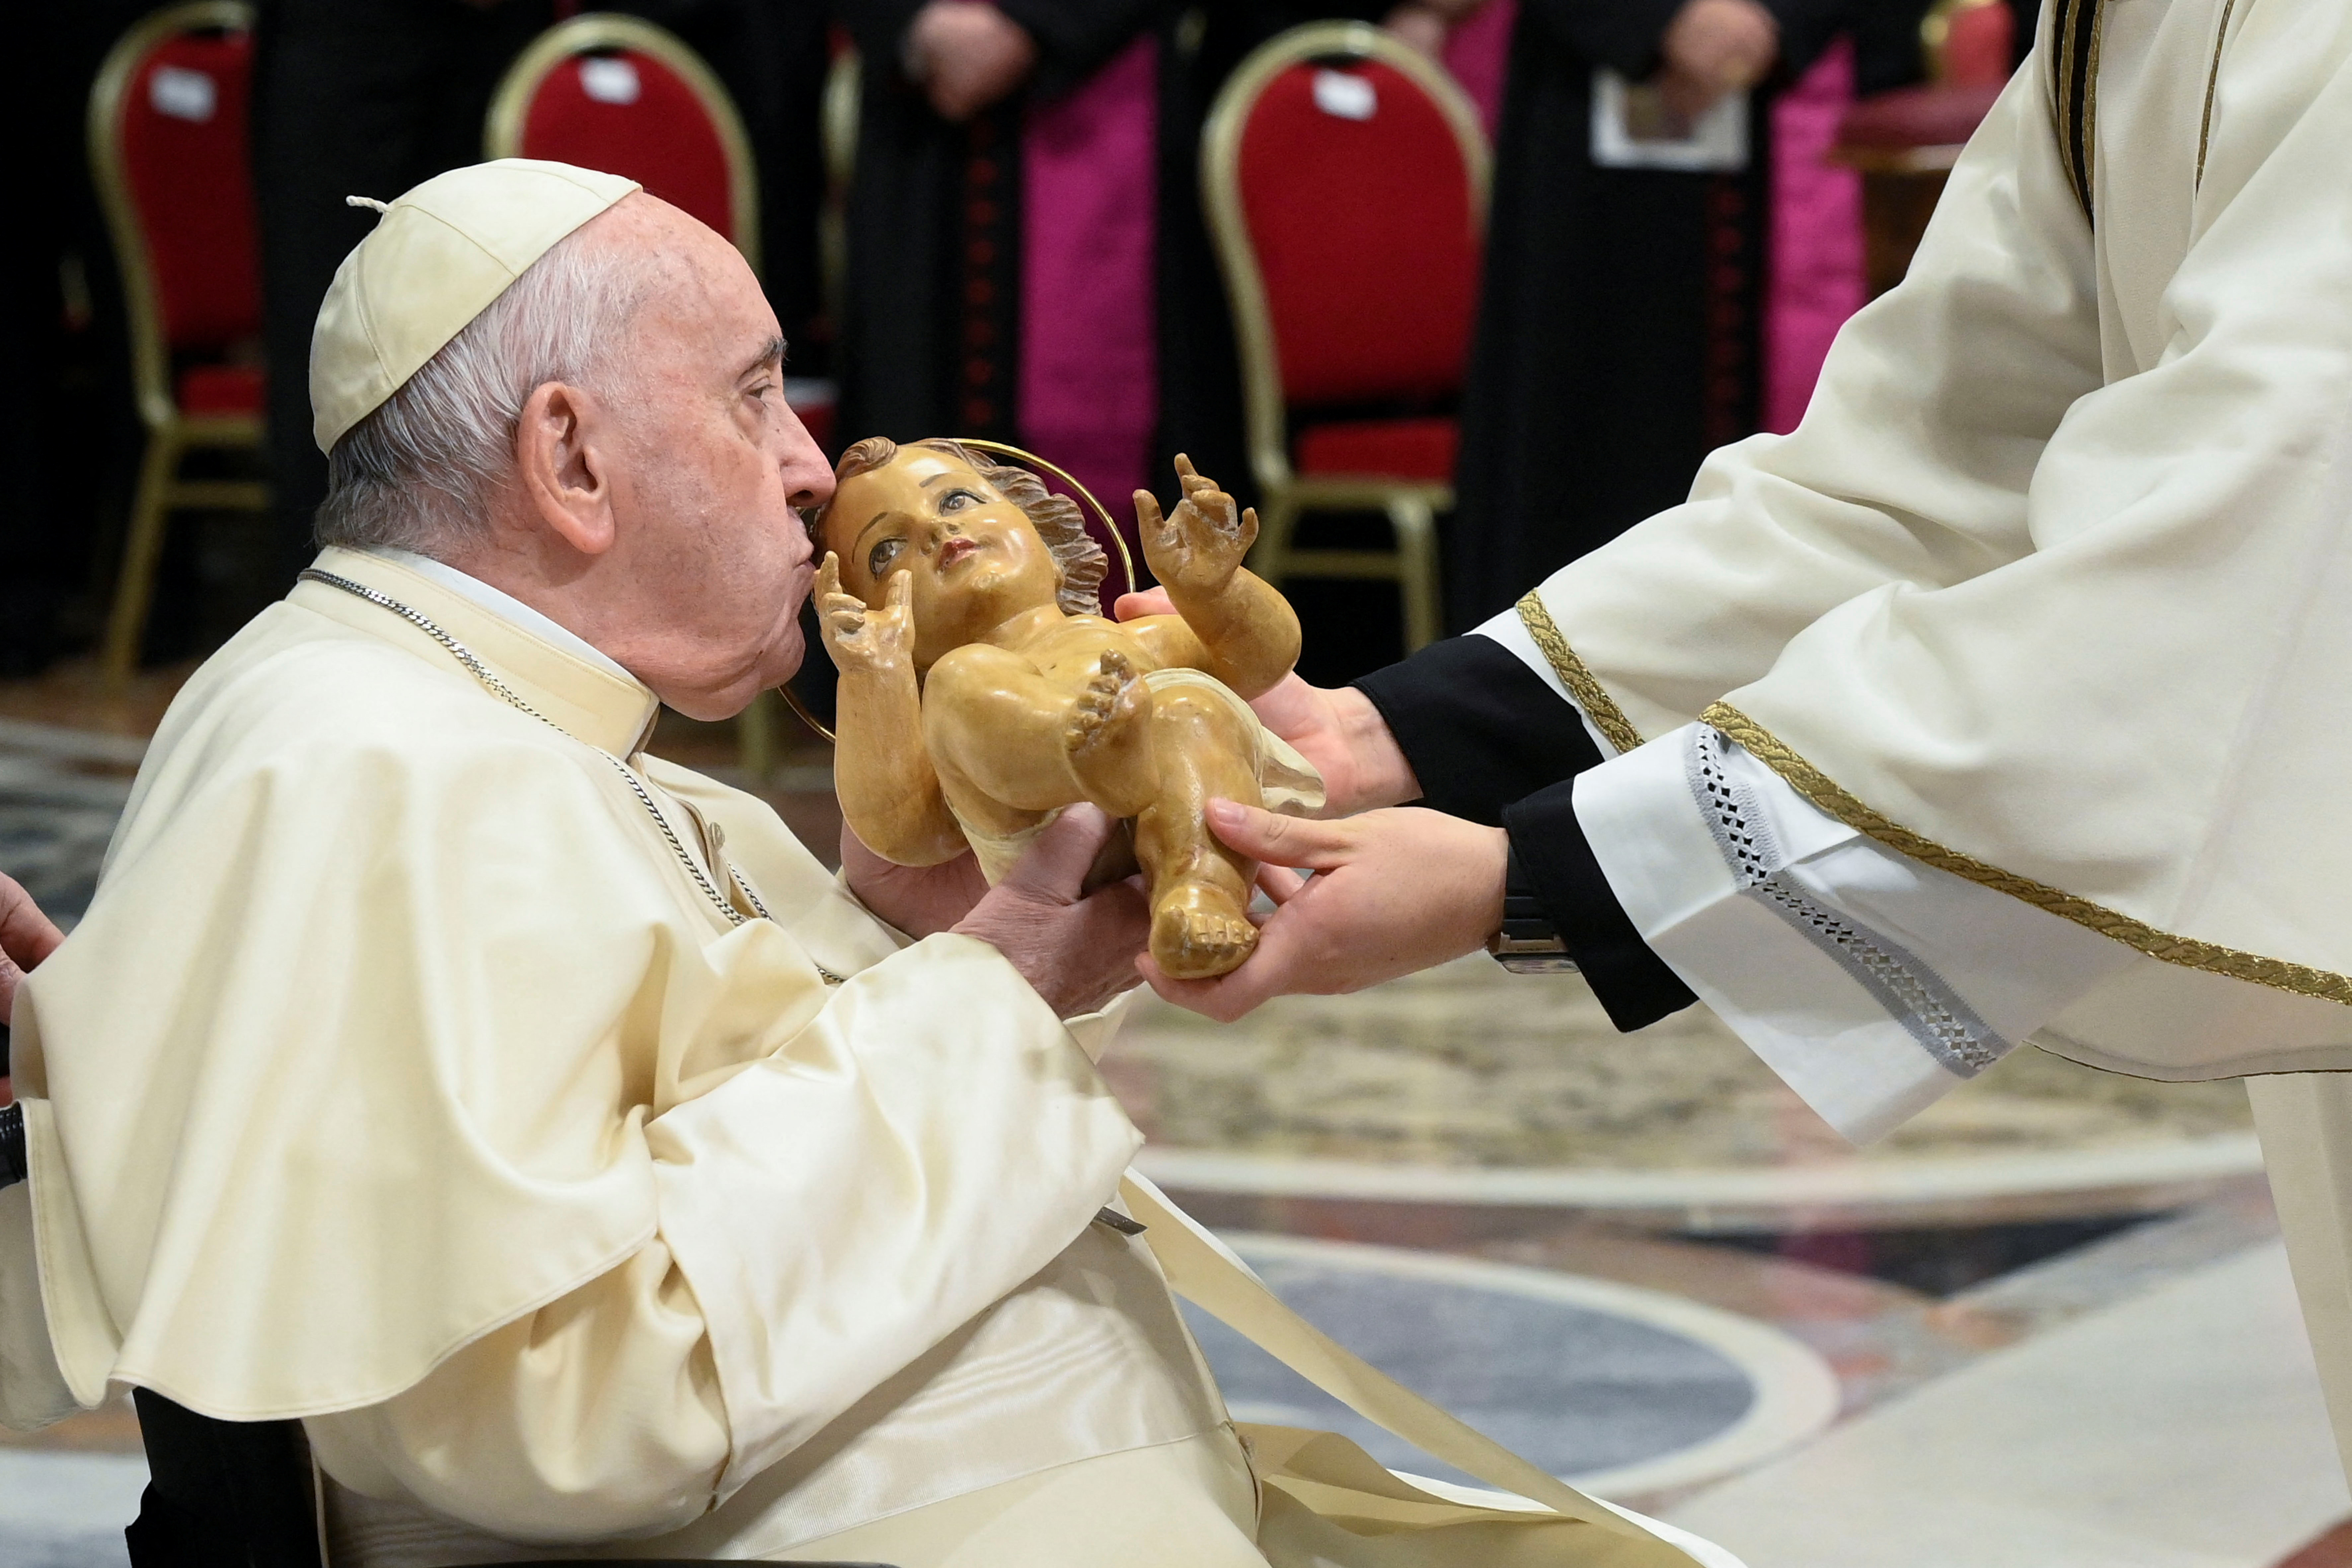 The Pope at St. Peter's Basilica (via Reuters)